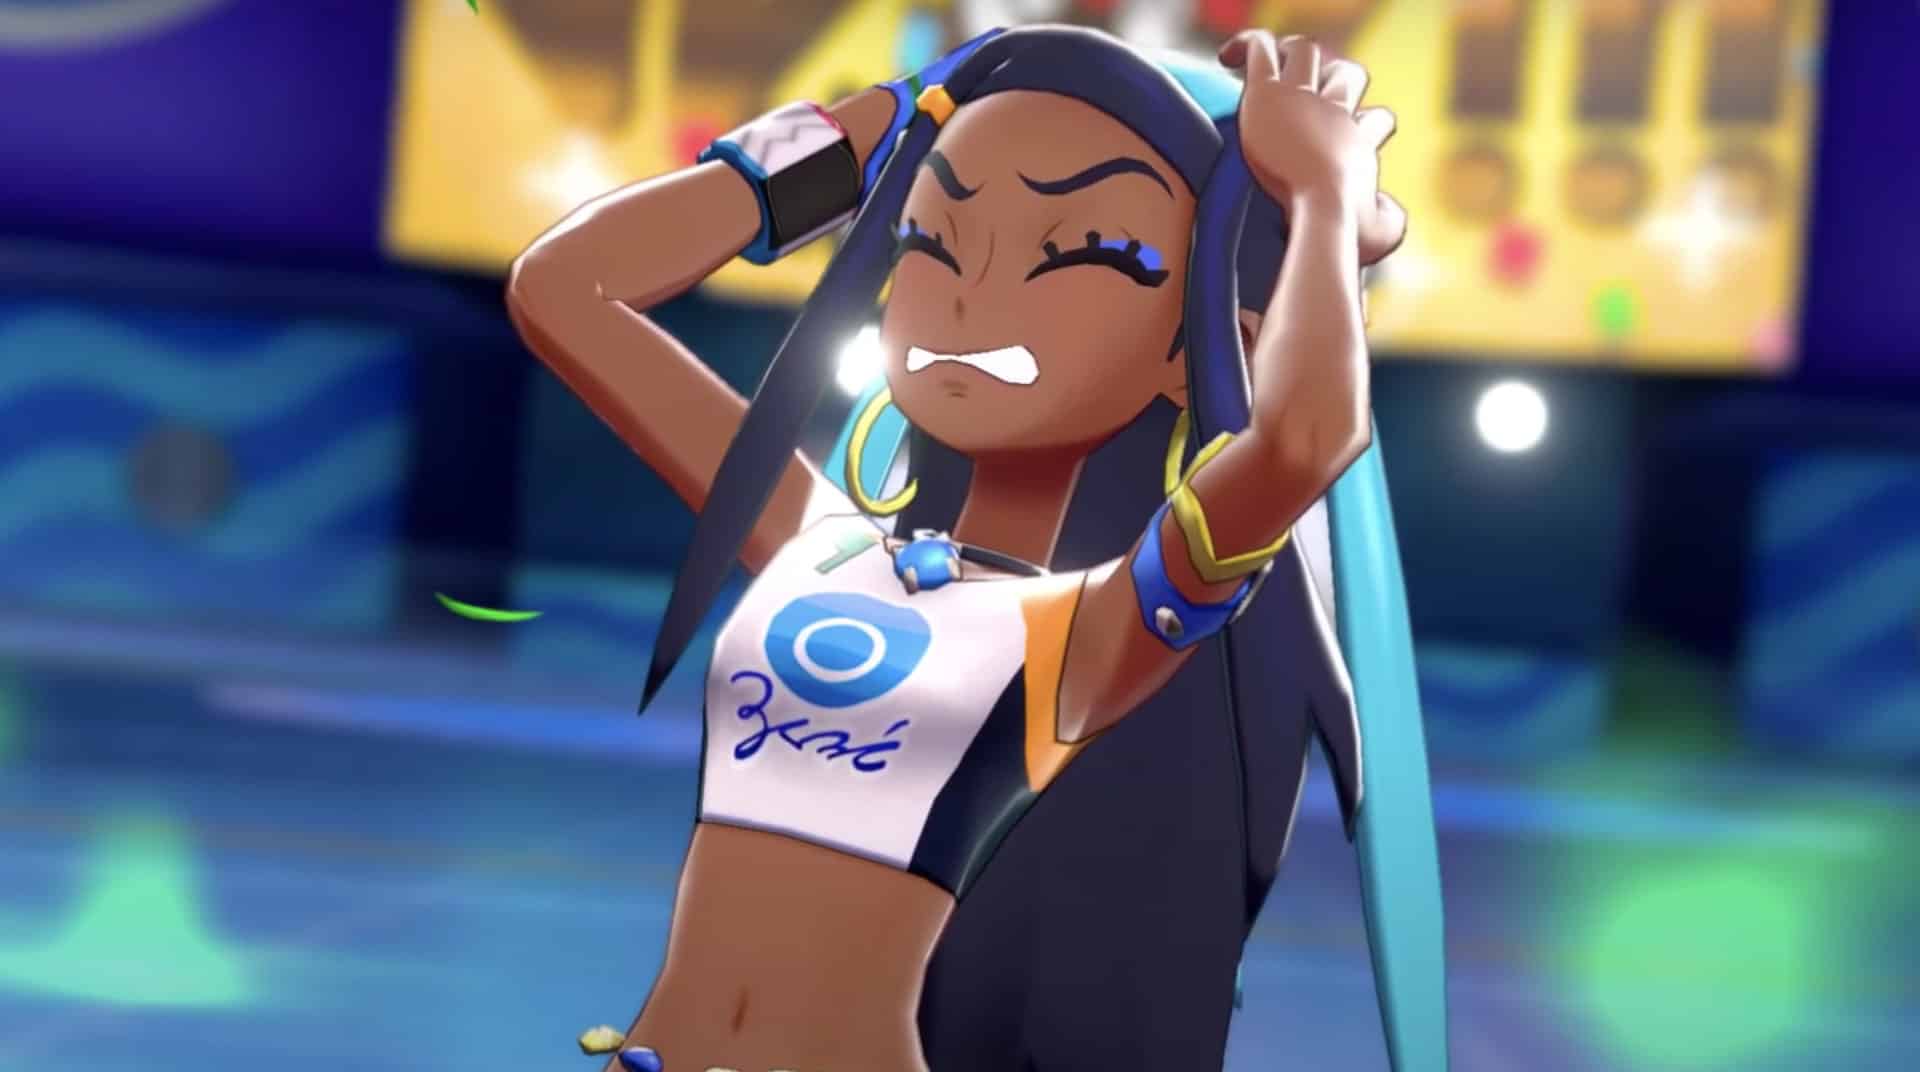 Screenshot of Pokemon Sword & Shield gym leader Nessa frustrated after losing.